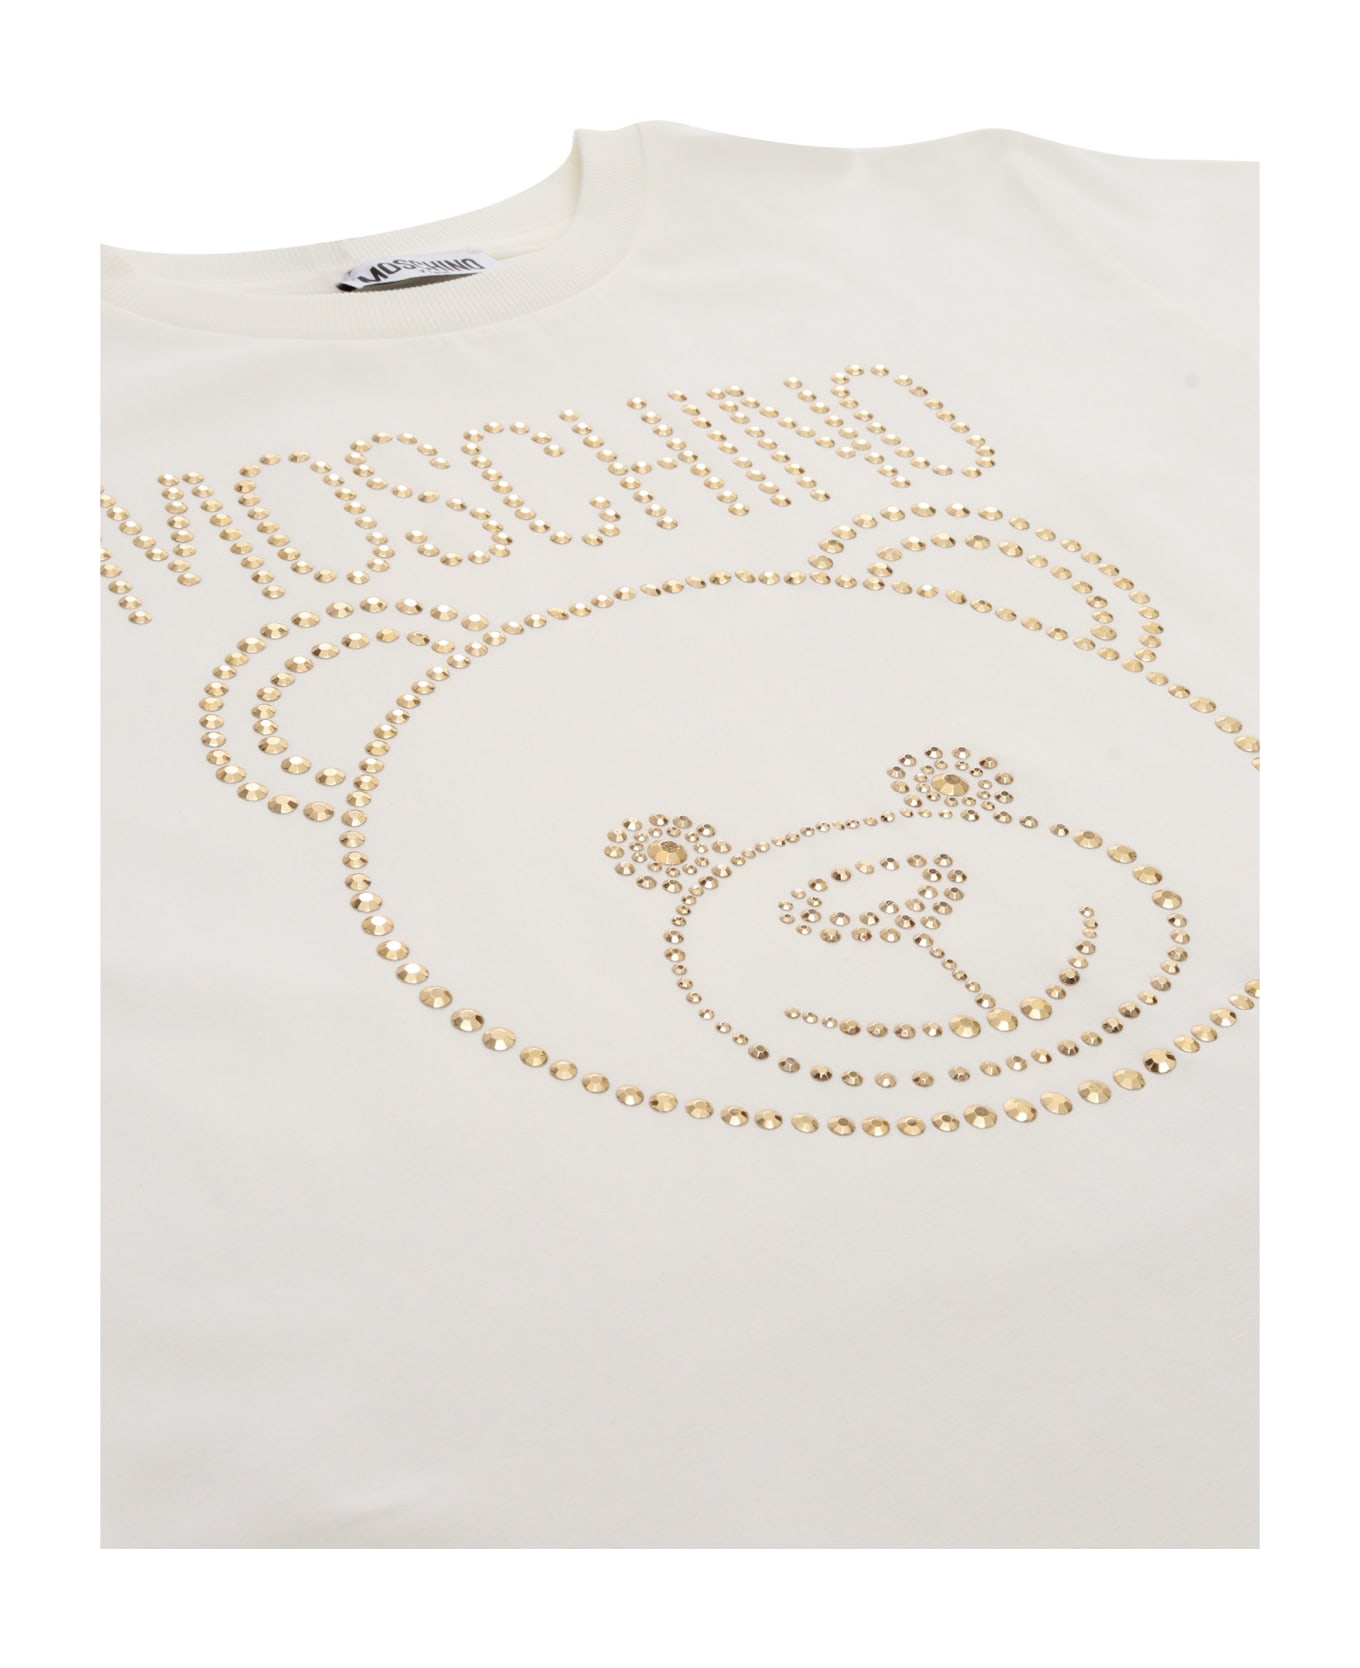 Moschino Maxi T-shirt With Studs - WHITE Tシャツ＆ポロシャツ